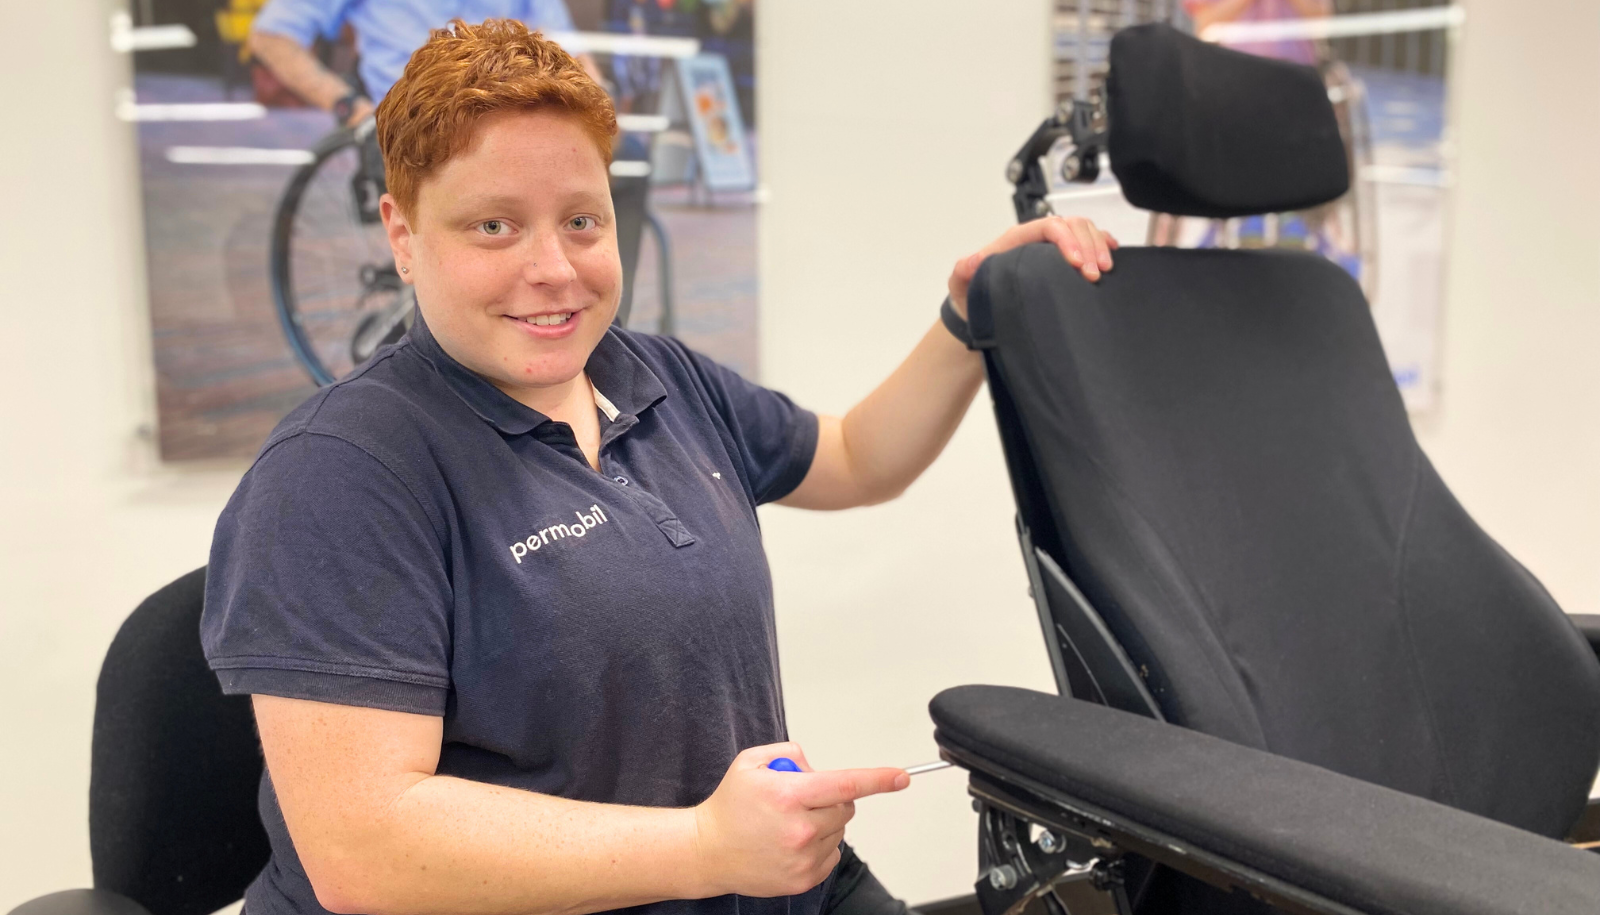 Monique sits in her ‘magic chair’. She wears a navy-blue polo shirt and smiles at the camera. Monique adjusts the armrest width, made easier on her body by elevating the height of the ‘magic chair’ seat so her torso and shoulders aren’t strained.